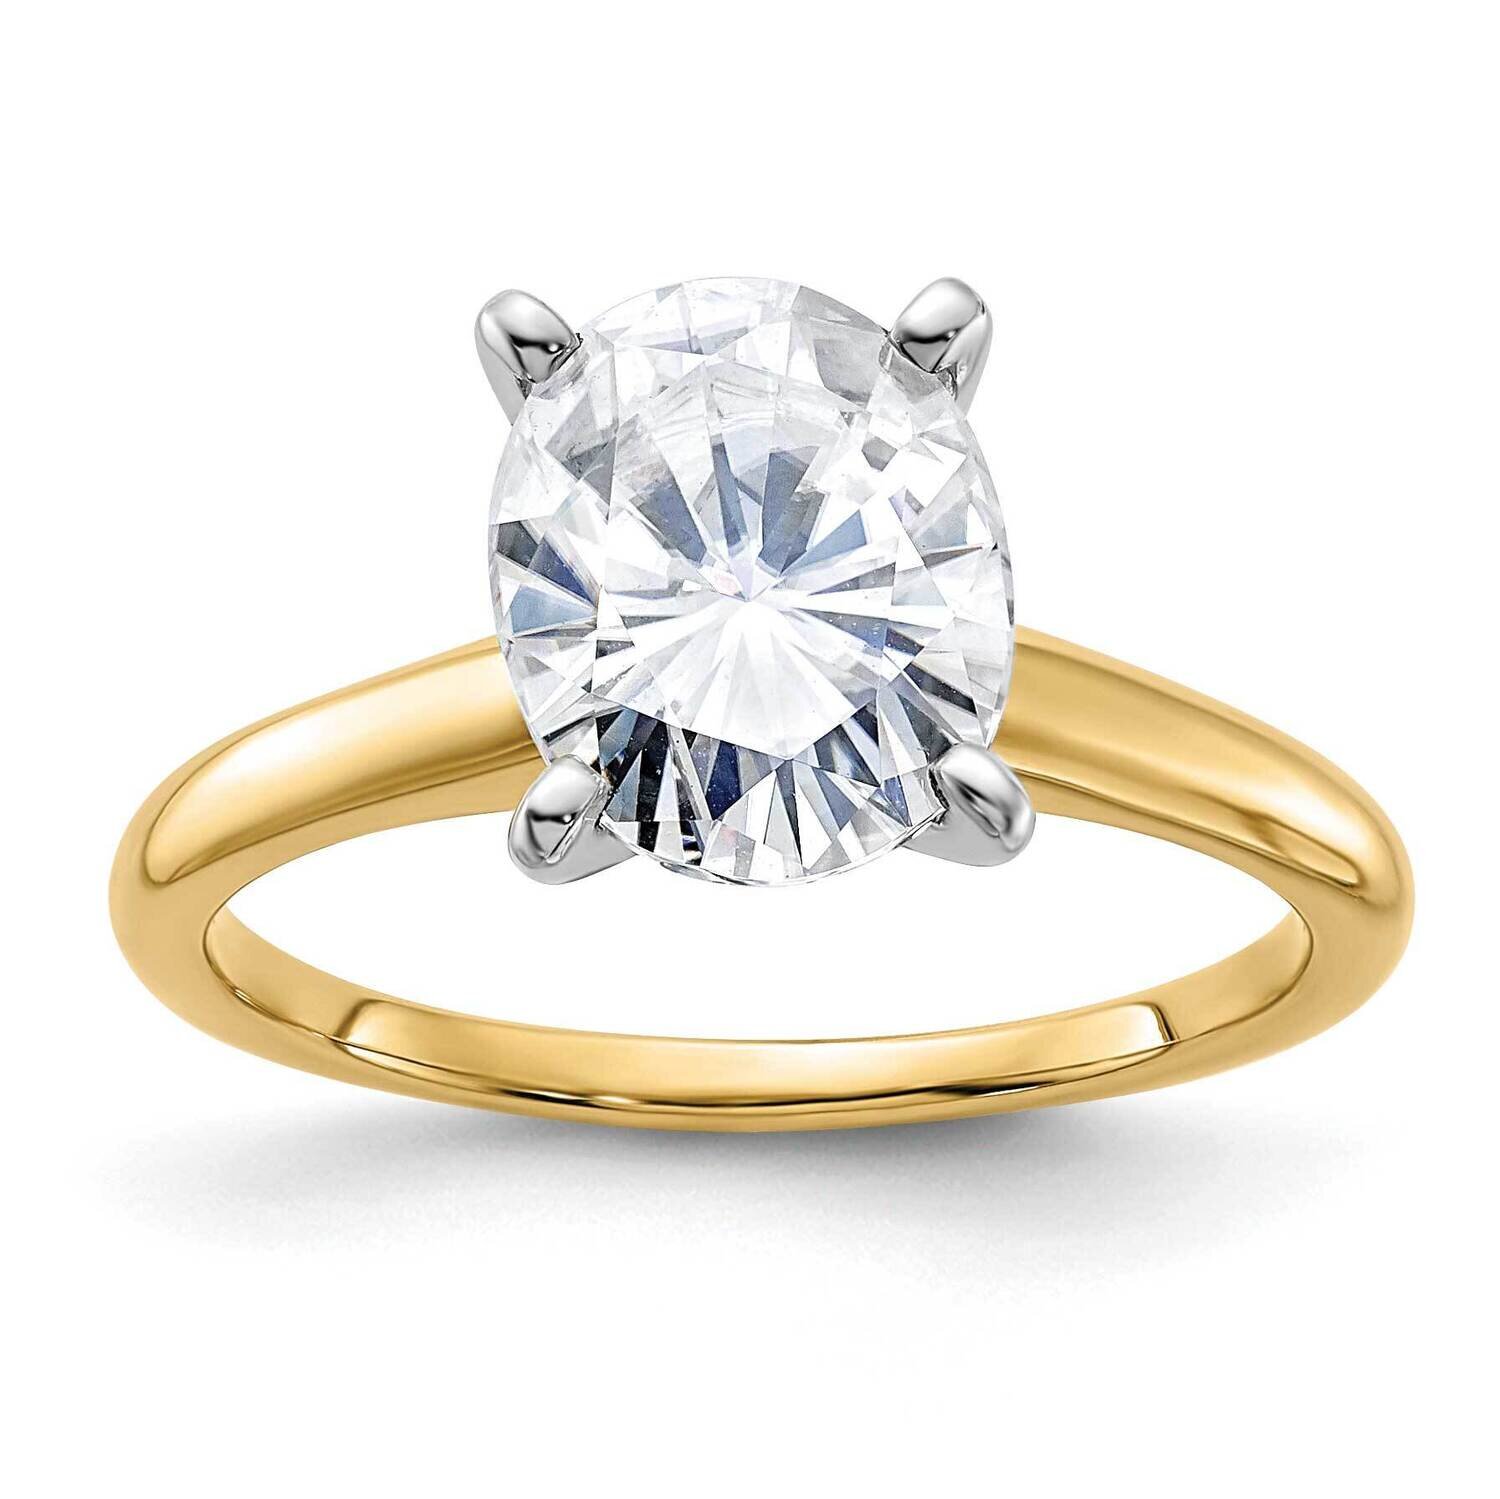 3ct. G H I True Light Oval Moissanite Solitaire Ring 14k Two Tone Gold RM5965O-300-7MT